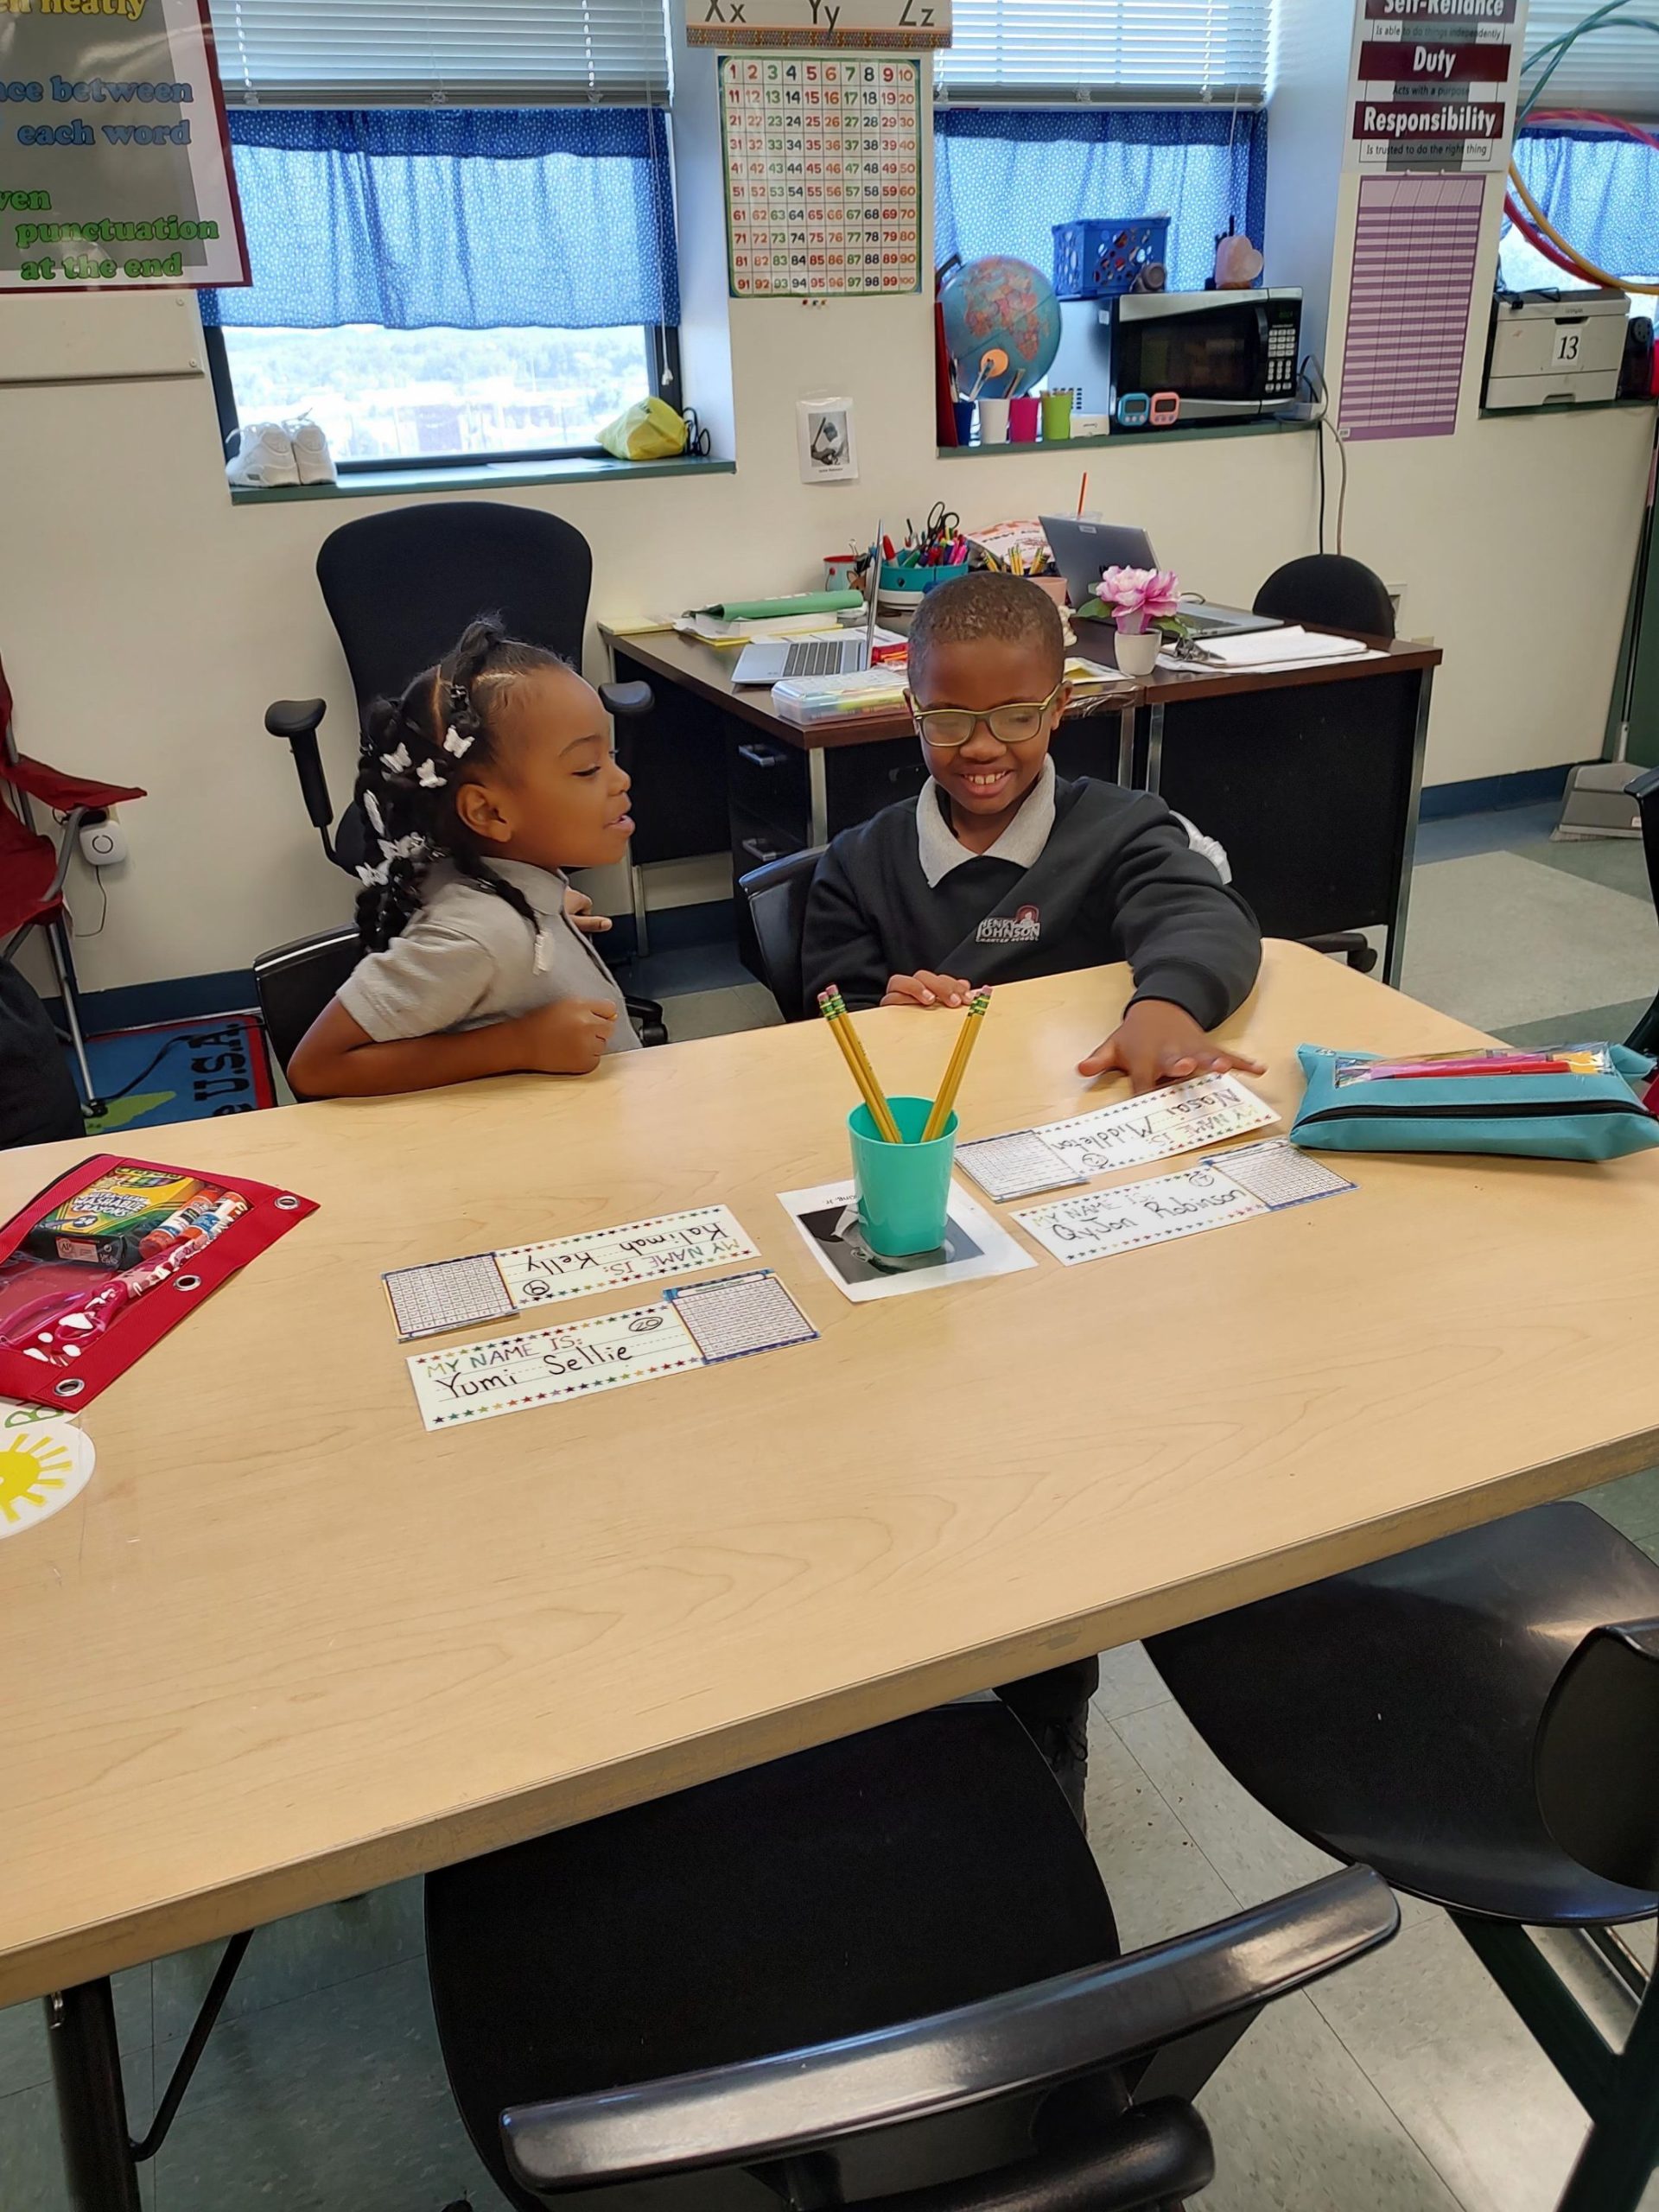 Two children sitting at a desk learning